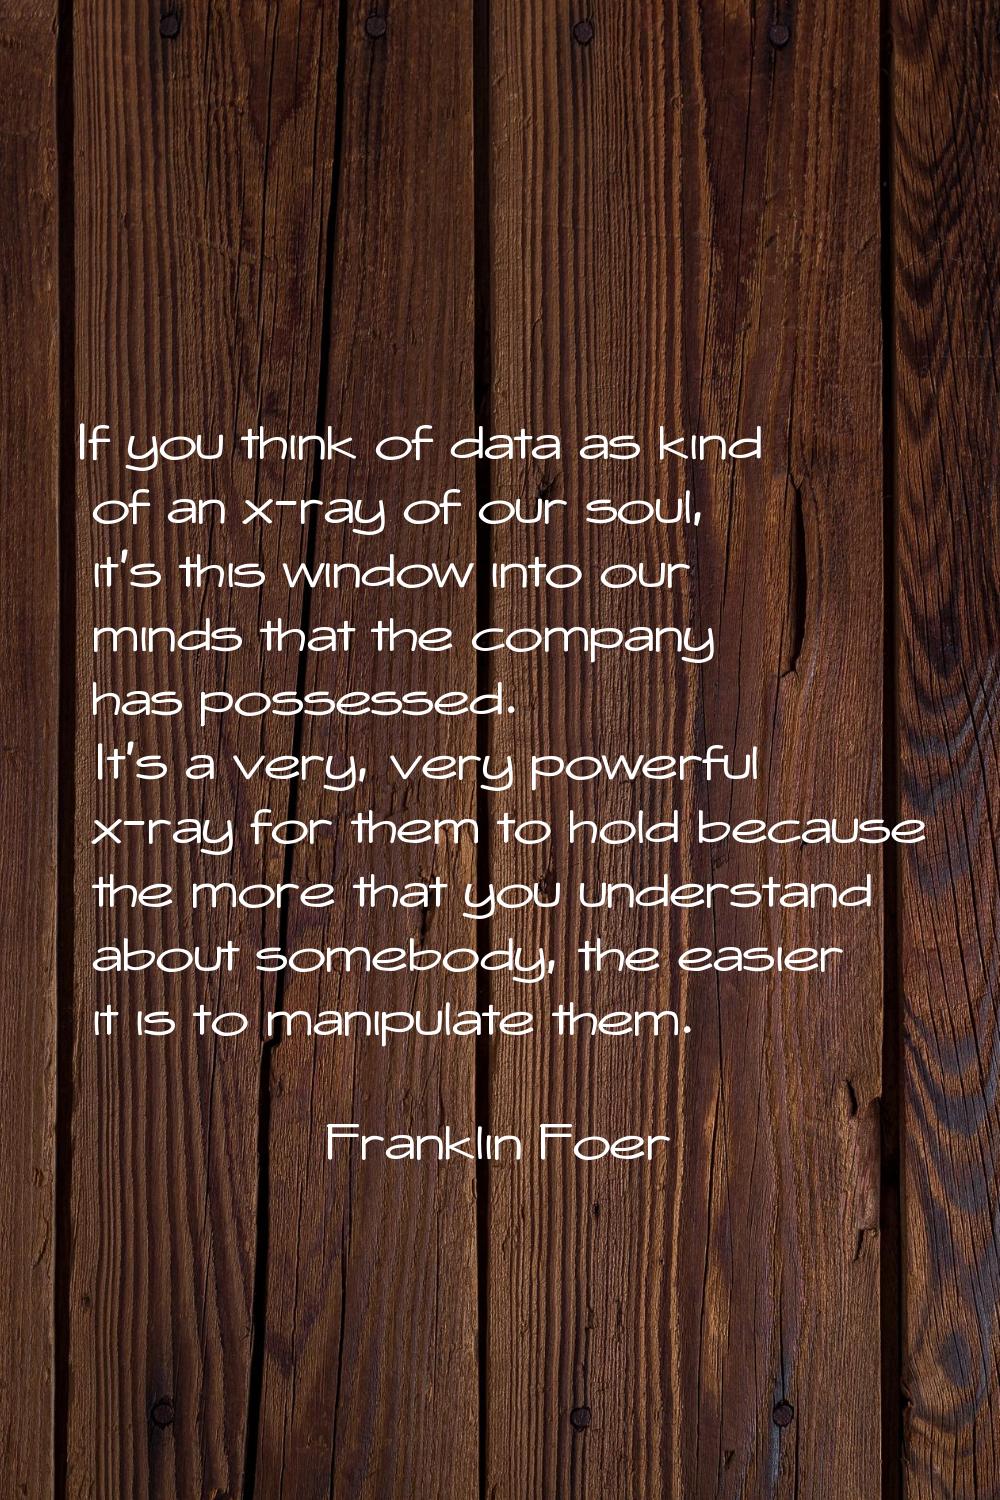 If you think of data as kind of an x-ray of our soul, it's this window into our minds that the comp